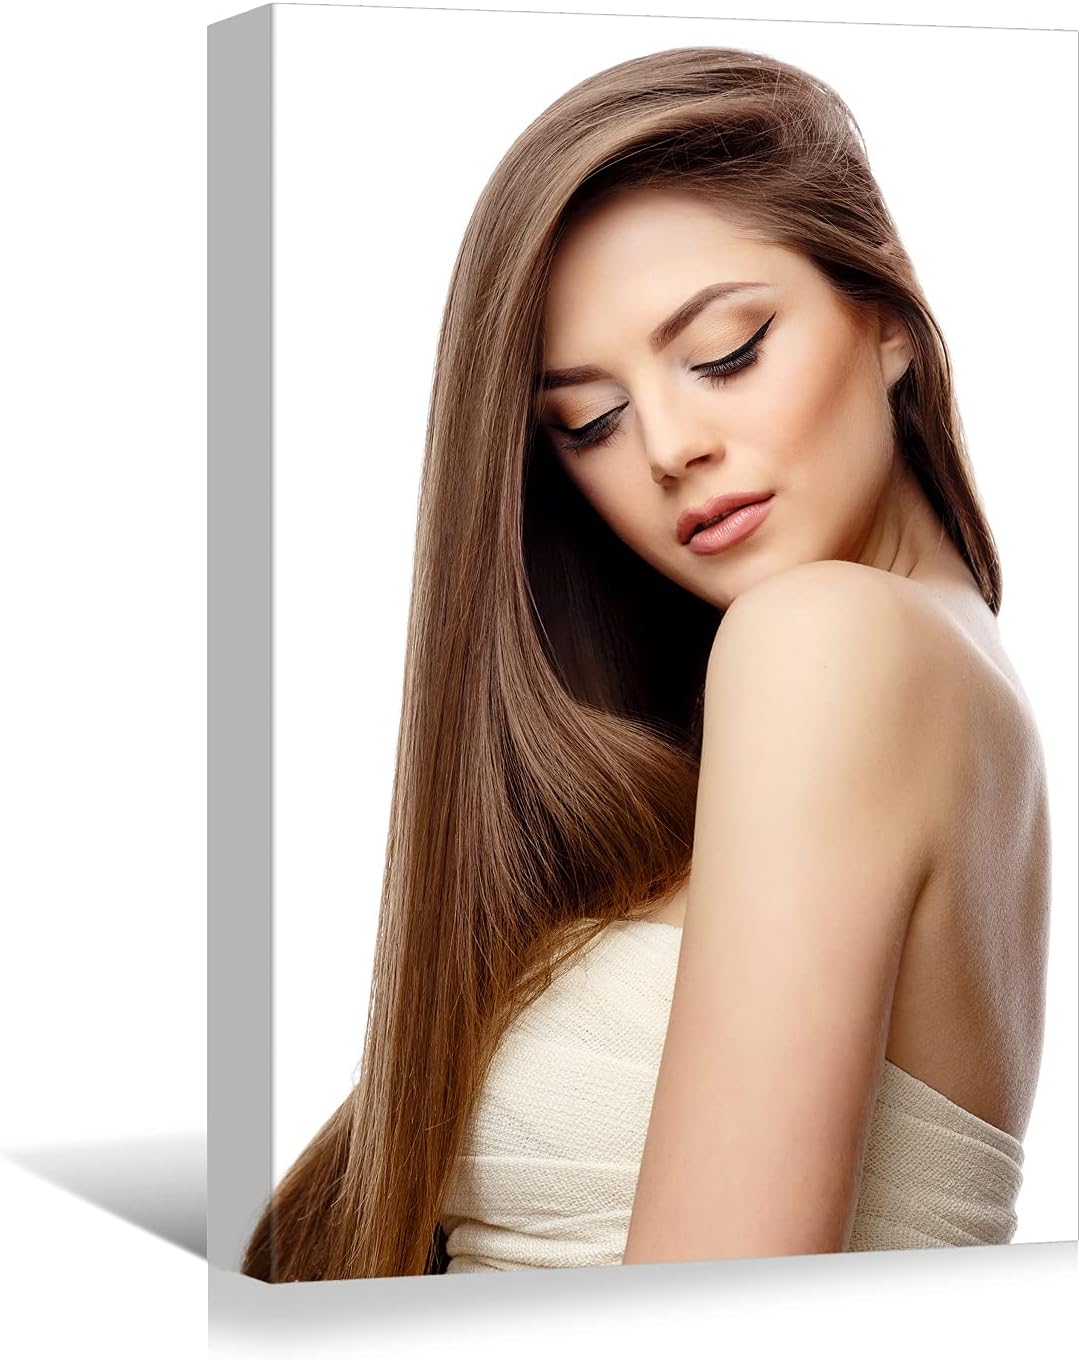 Looife Hair Salon Canvas Wall Art 12x16 Inch Beauty Girl Model with Smooth Long Hair Style Picture Prints Poster Artwork Stretched and Framed Ready to Hang Wall Decor Gallery Wrapped